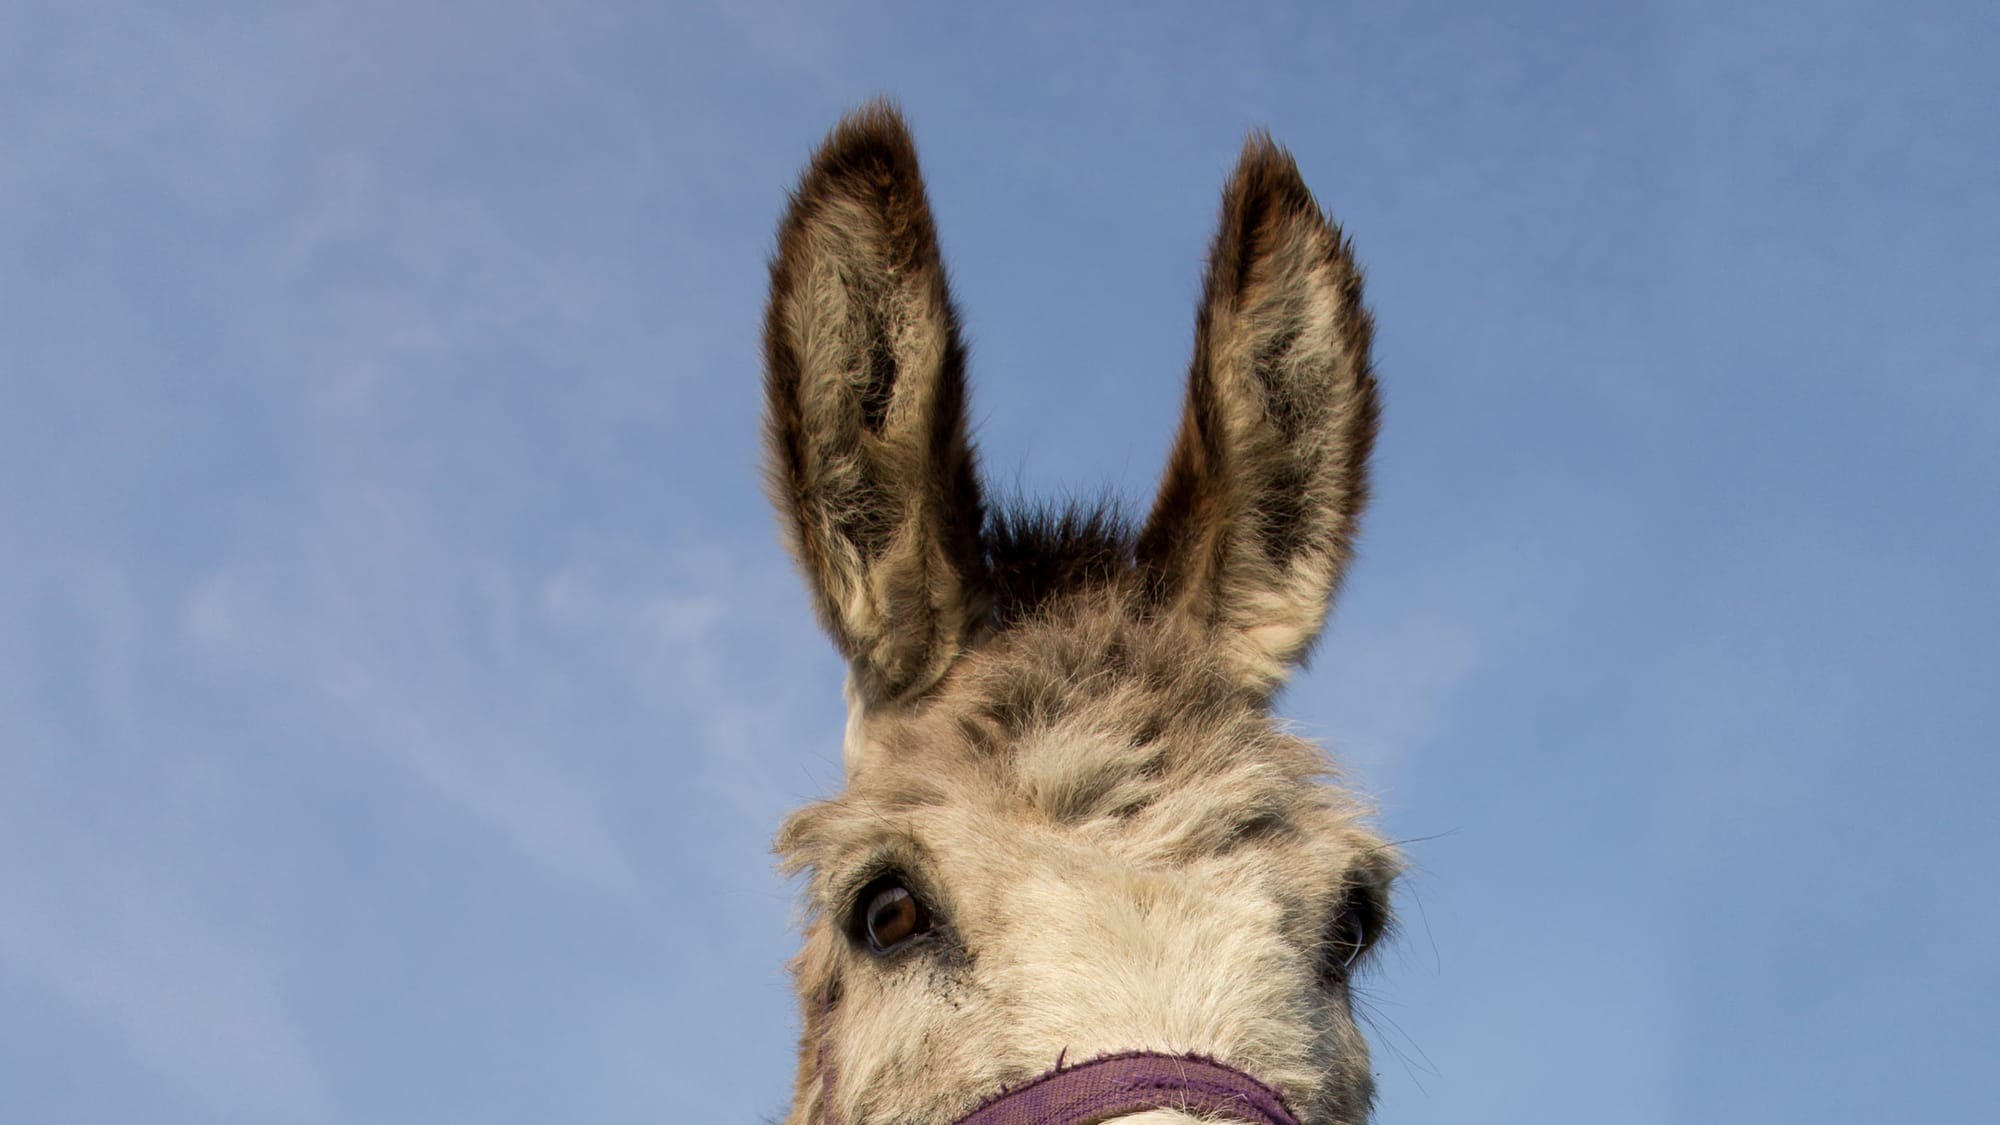 The handsome forehead and ears of a donkey, against a blue sky lightly dusted with clouds